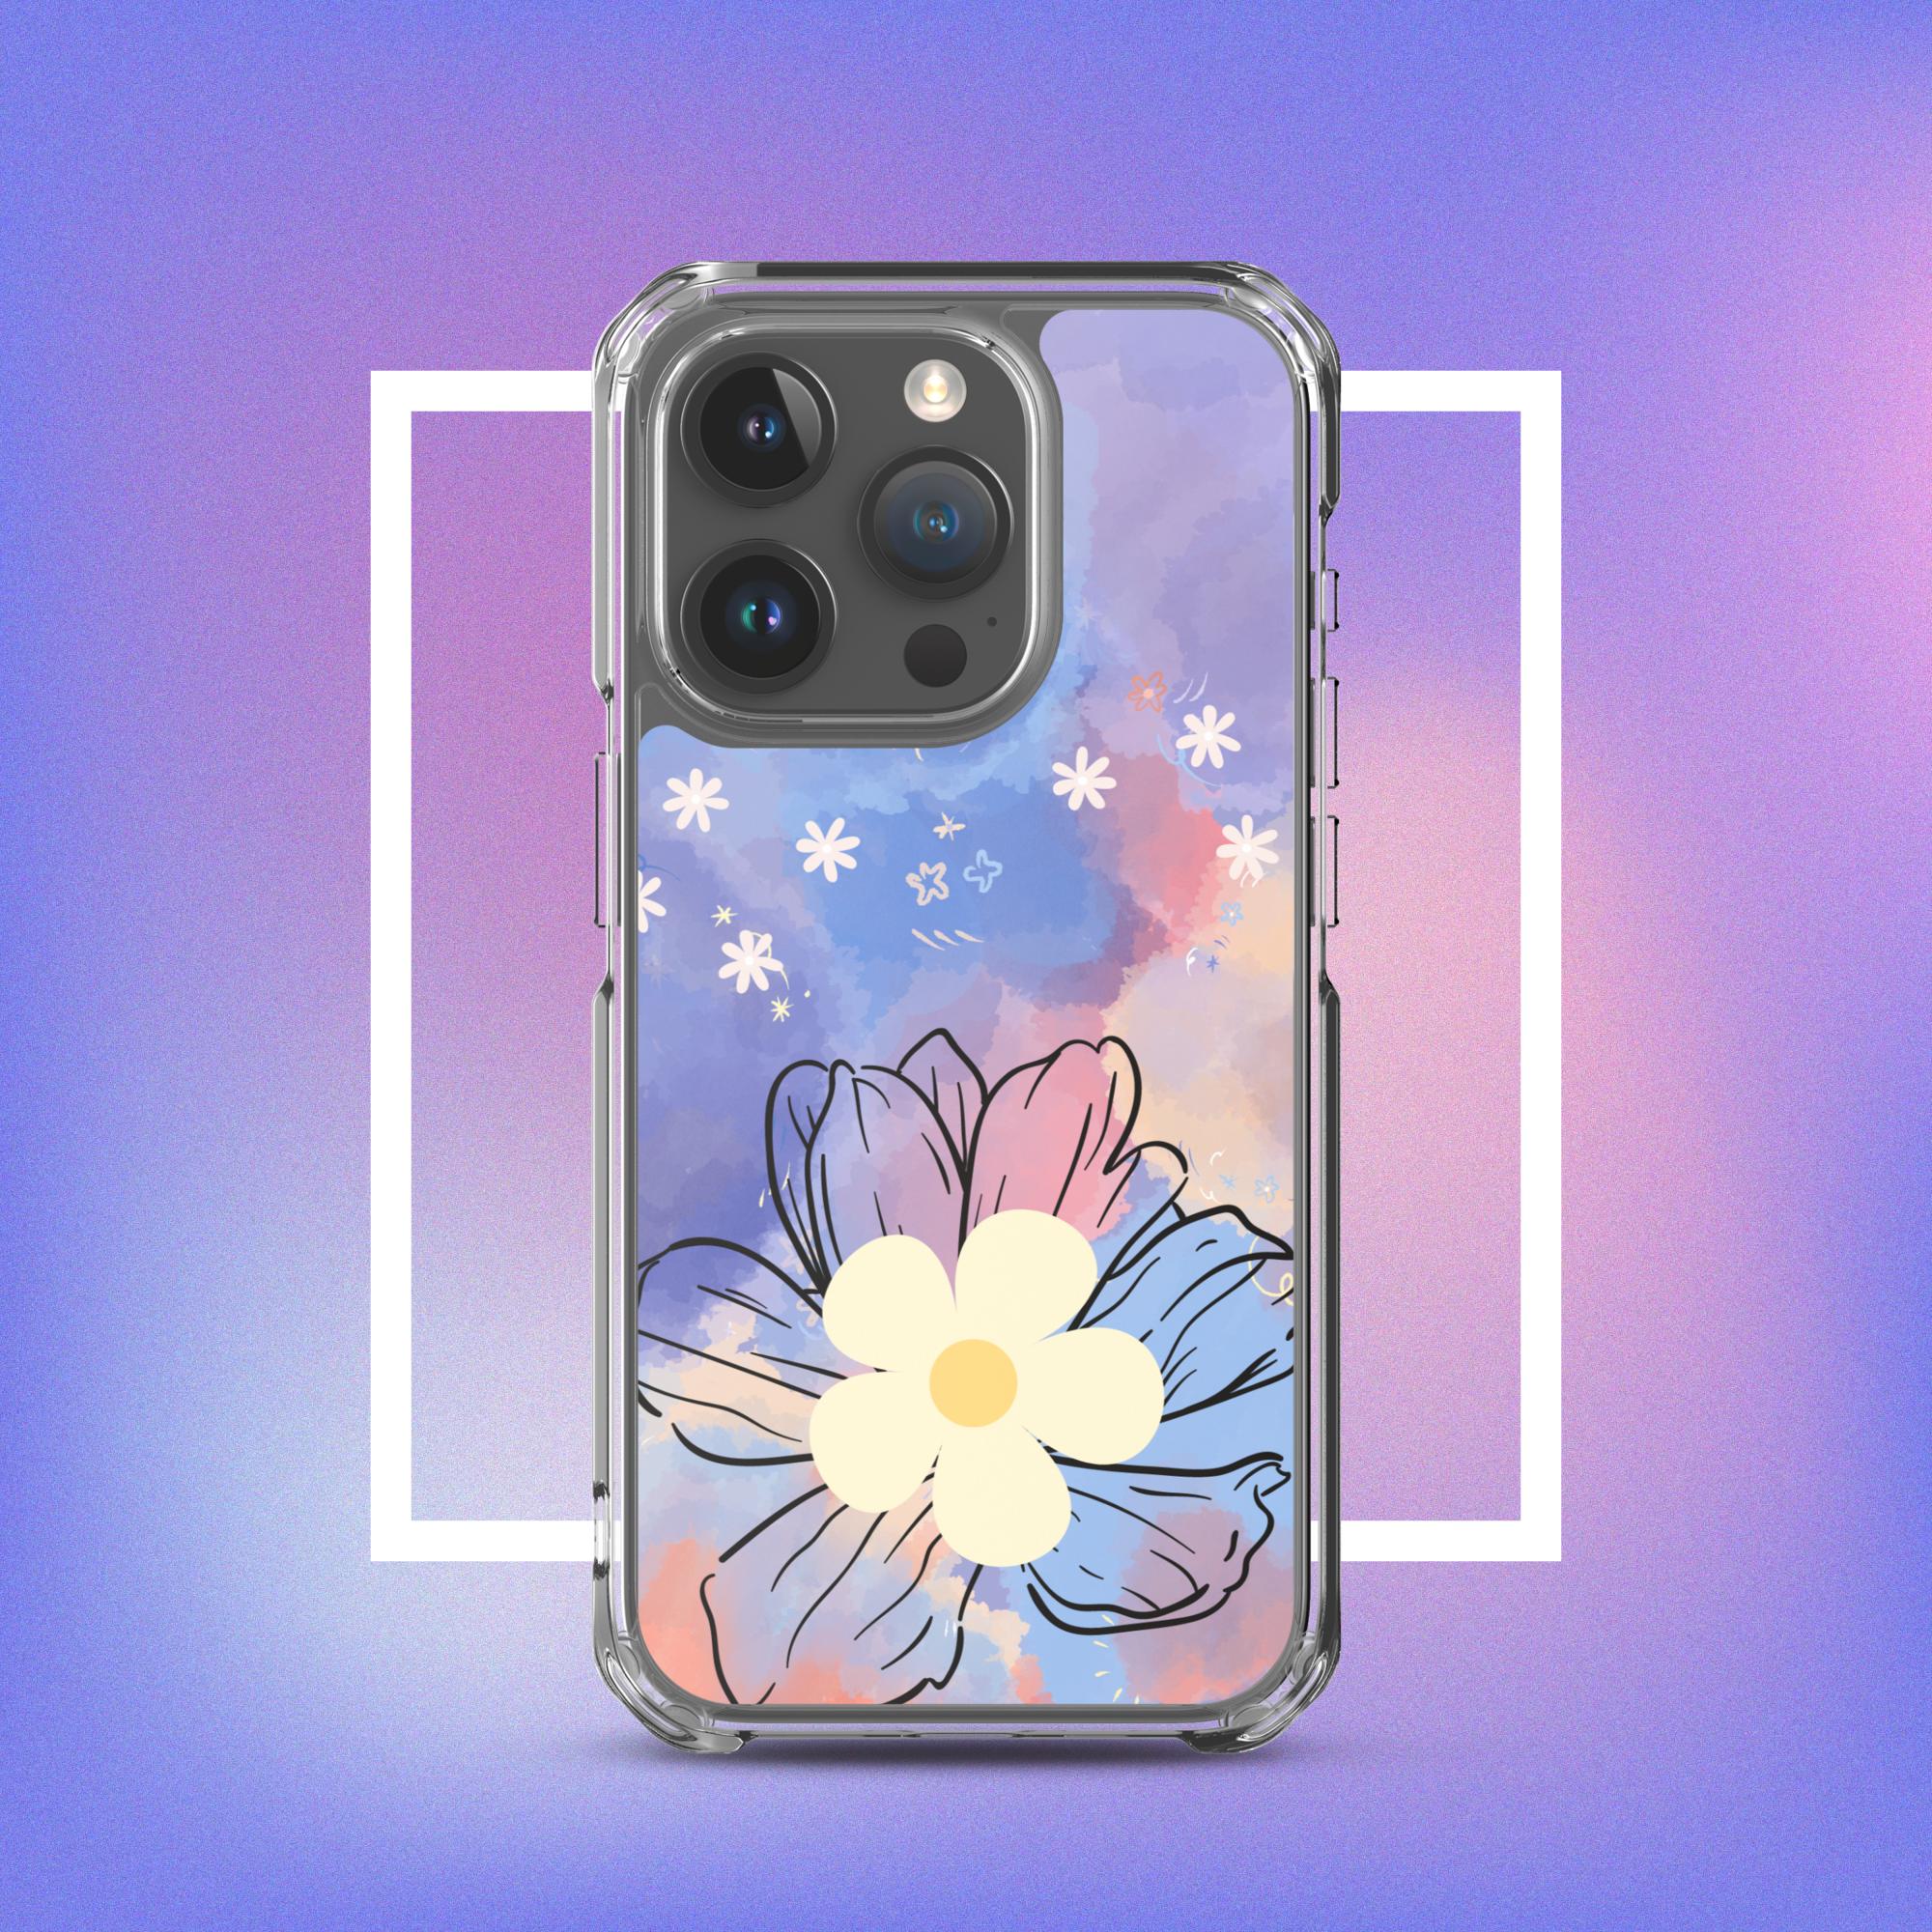 The Flower Galaxy - Iphone Case